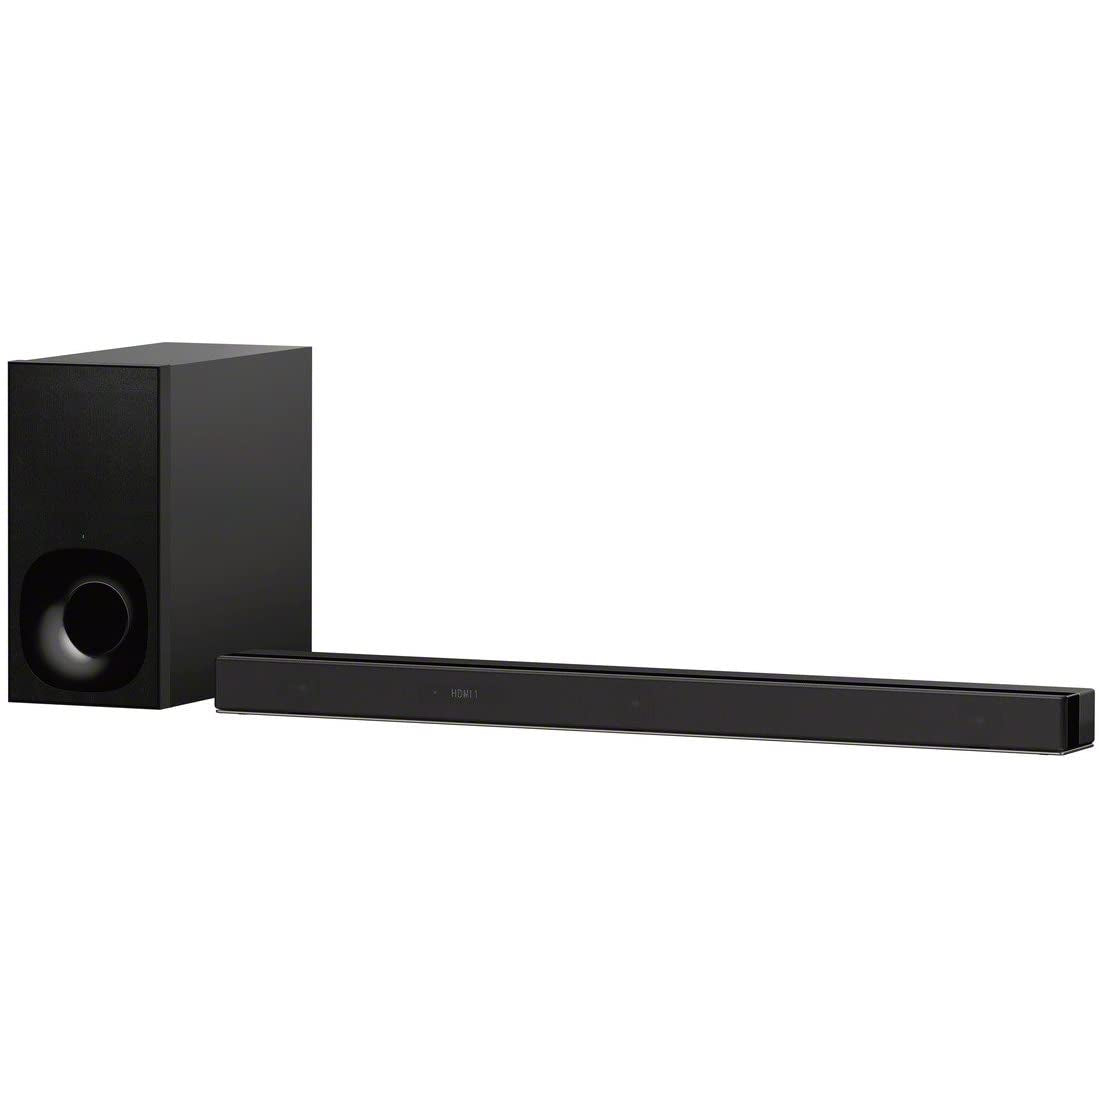 Sony HT-ZF9 Wi-Fi Bluetooth Sound Bar with Subwoofer - Refurbished Excellent